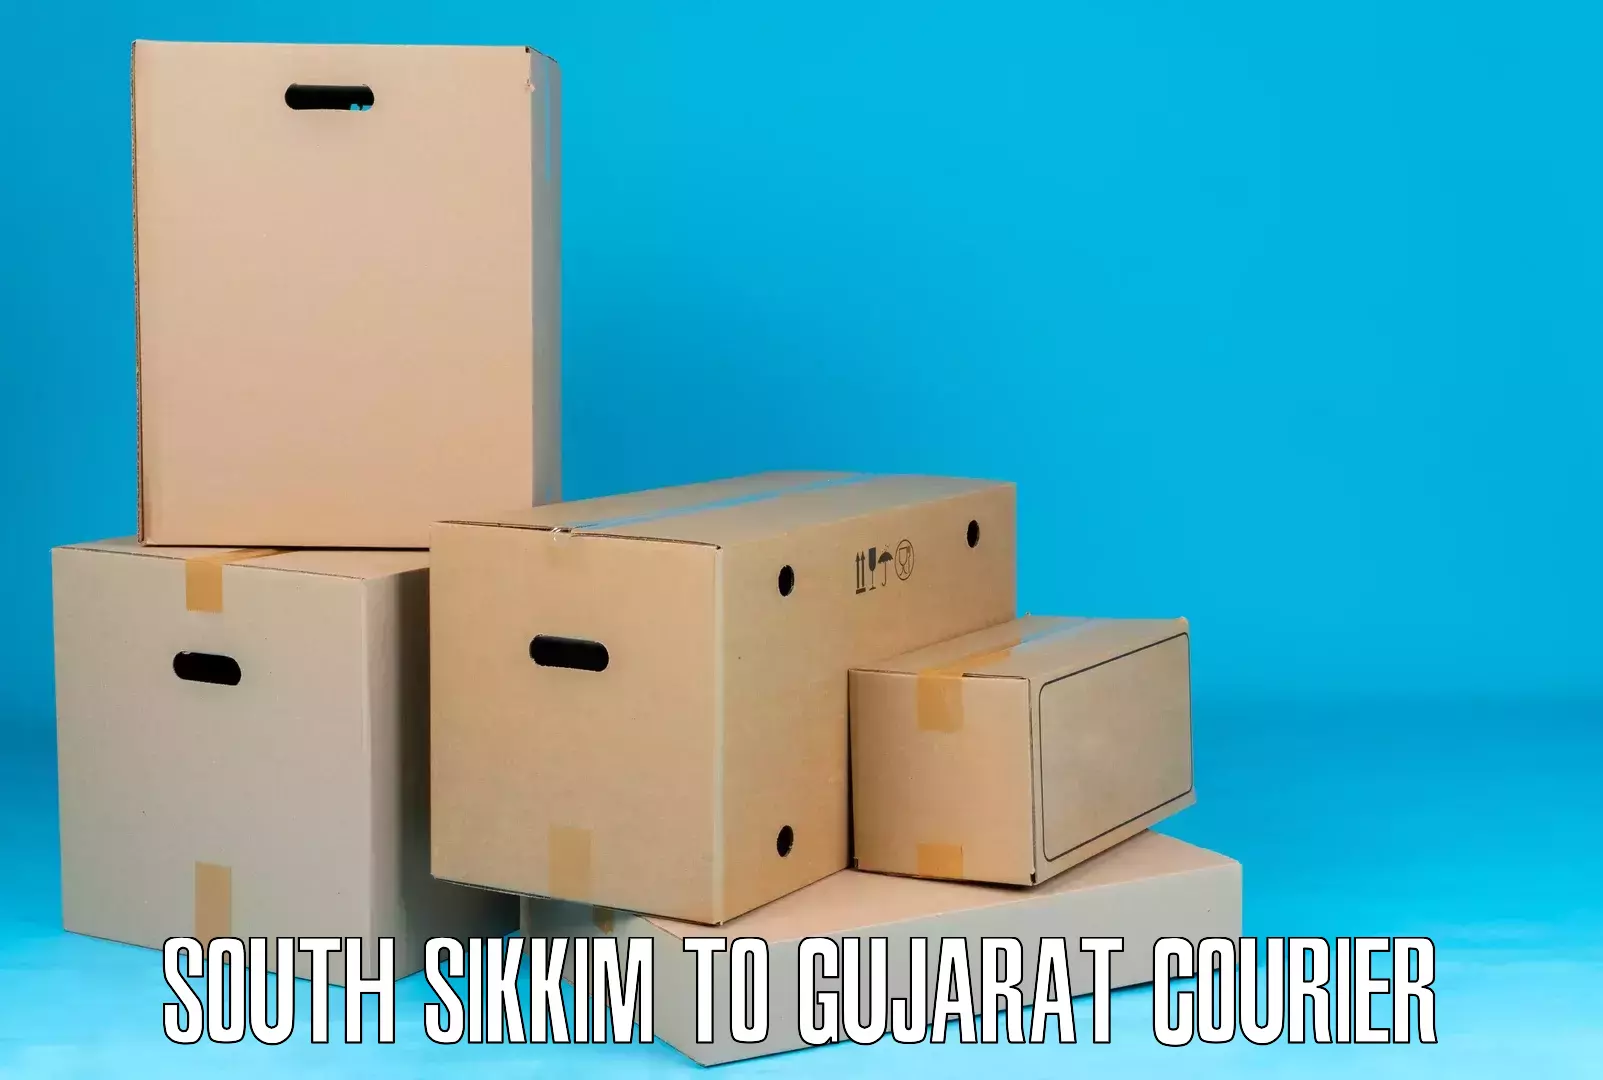 Affordable parcel service South Sikkim to Godhra